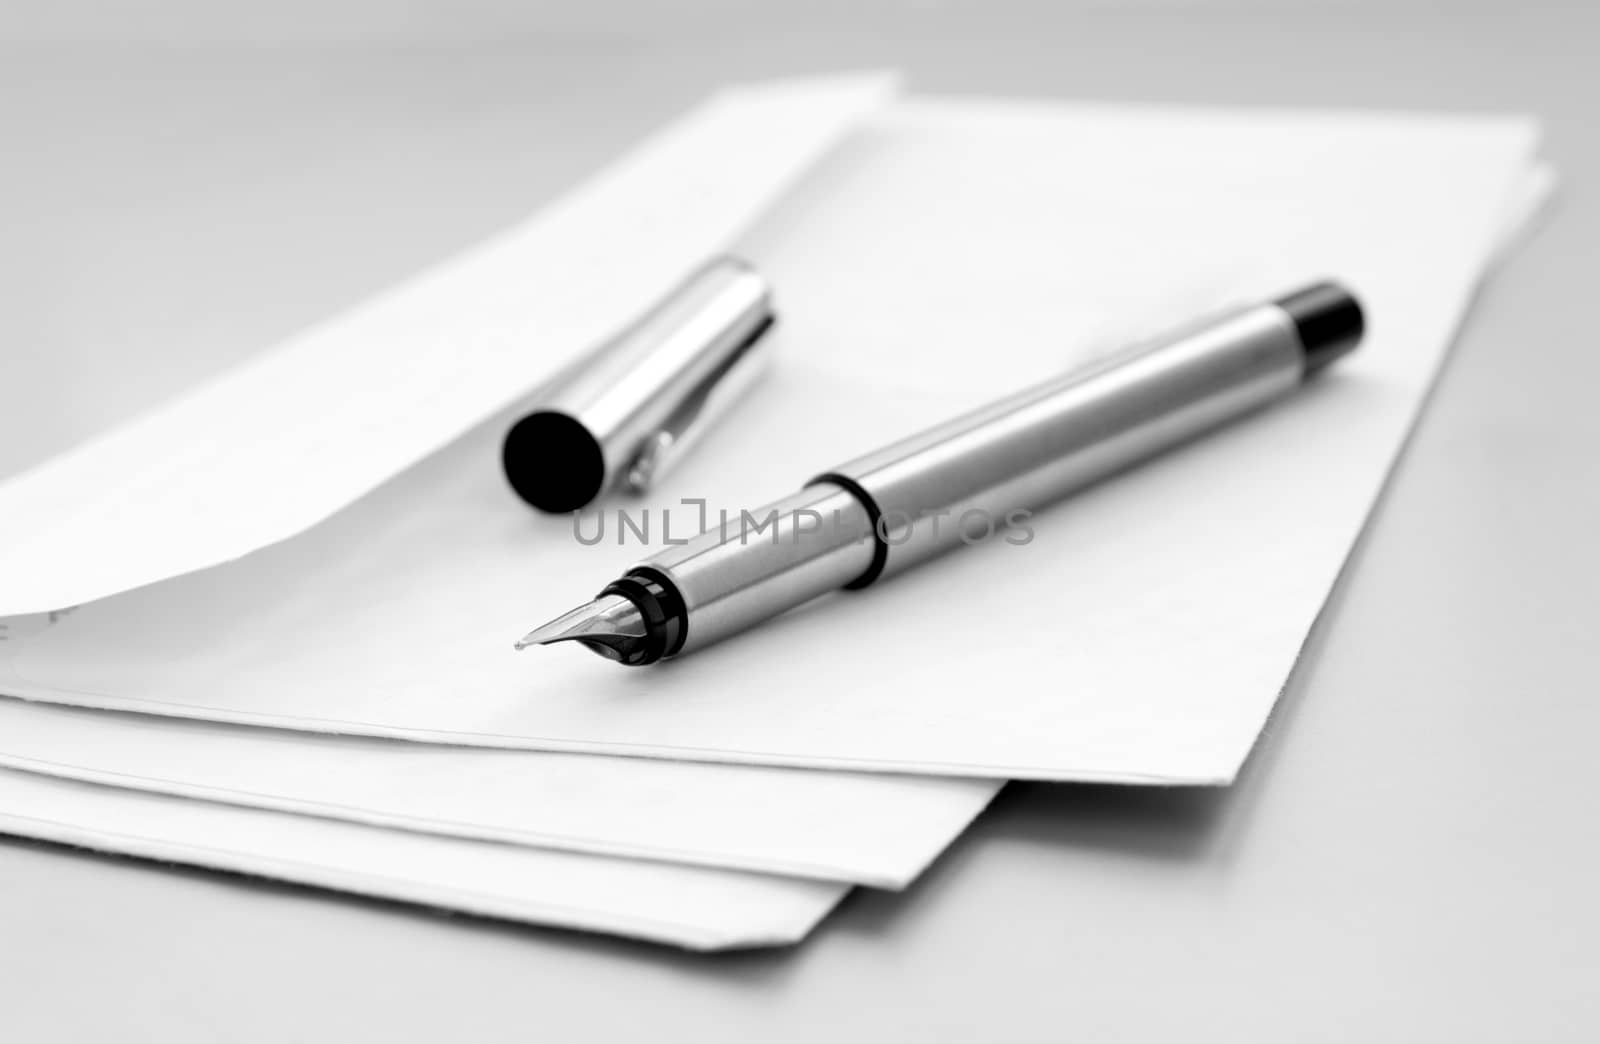 mailing envelope and pen on the table